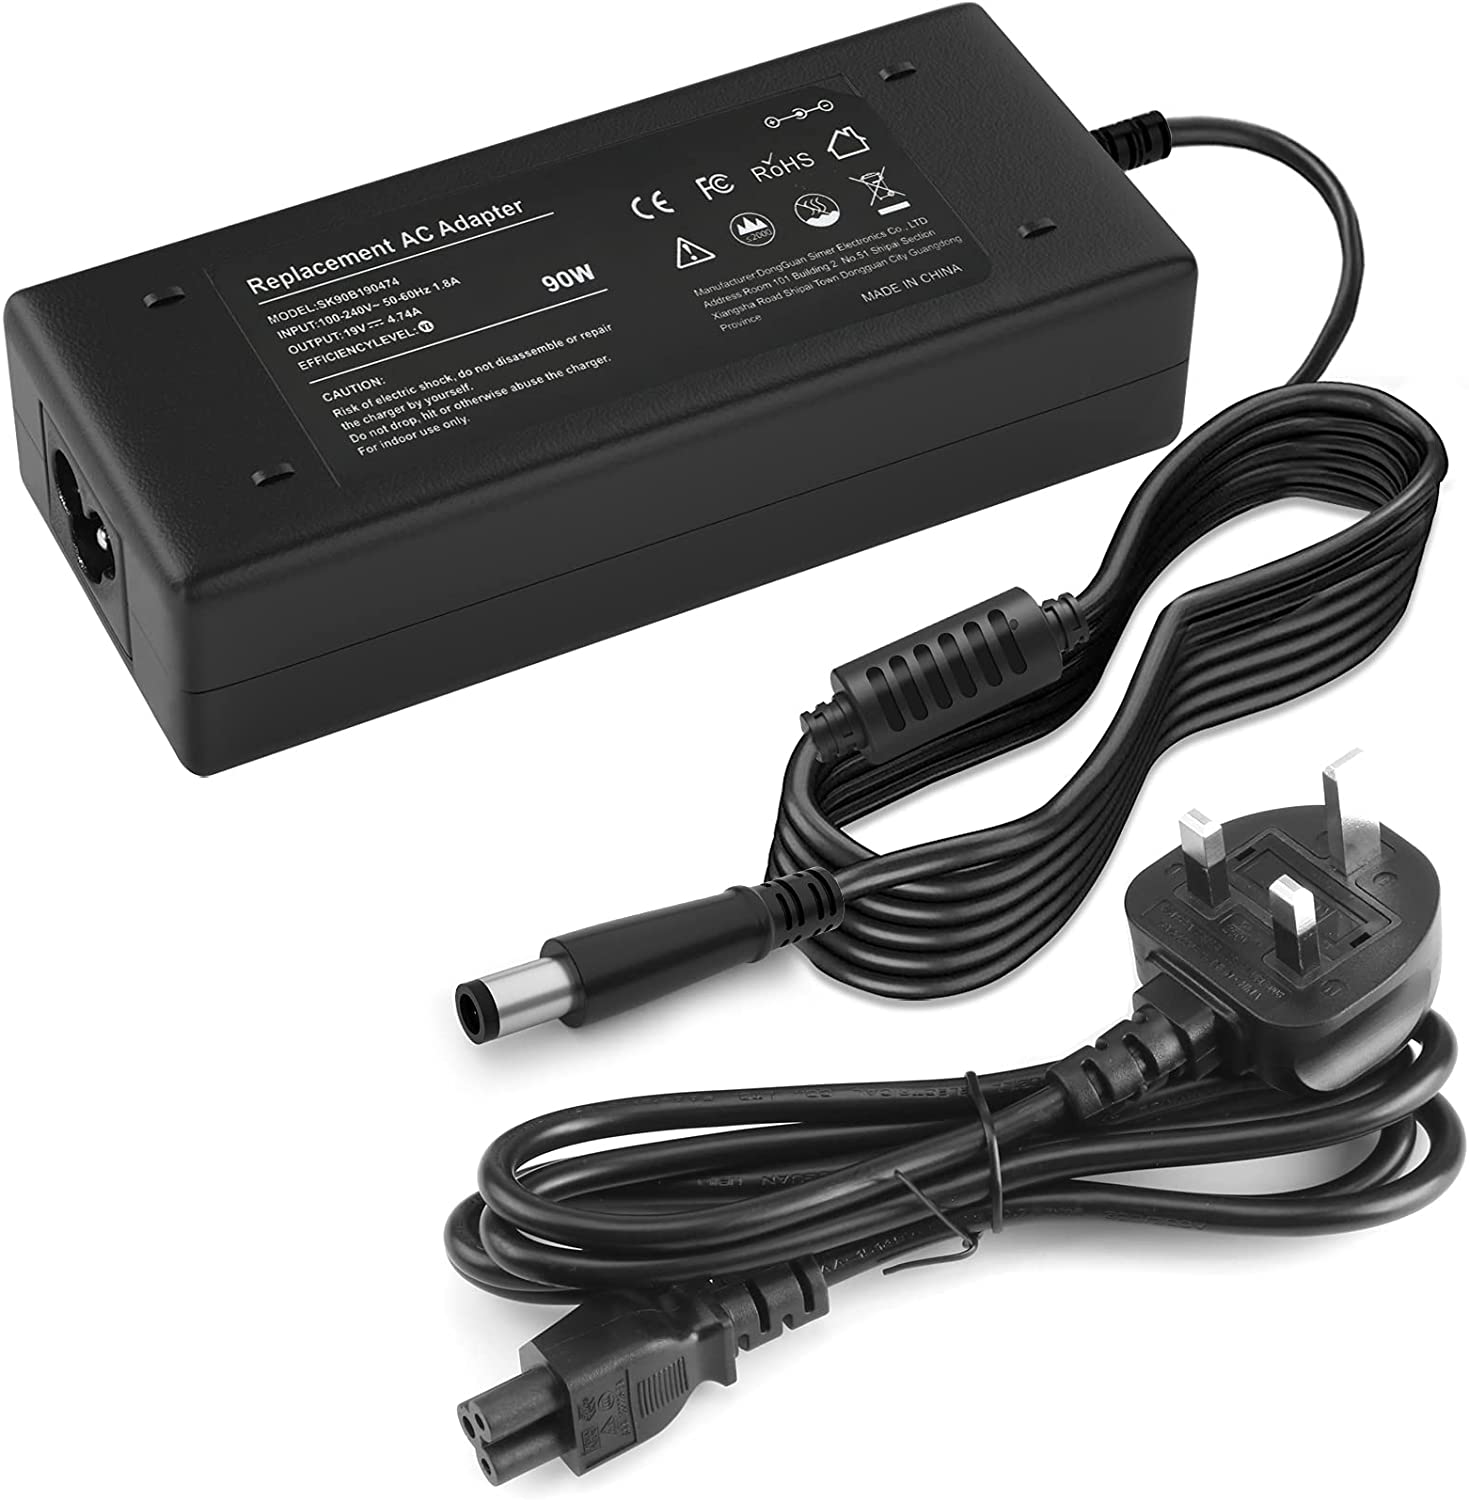 HP 519330-002 AC Adapter Charger